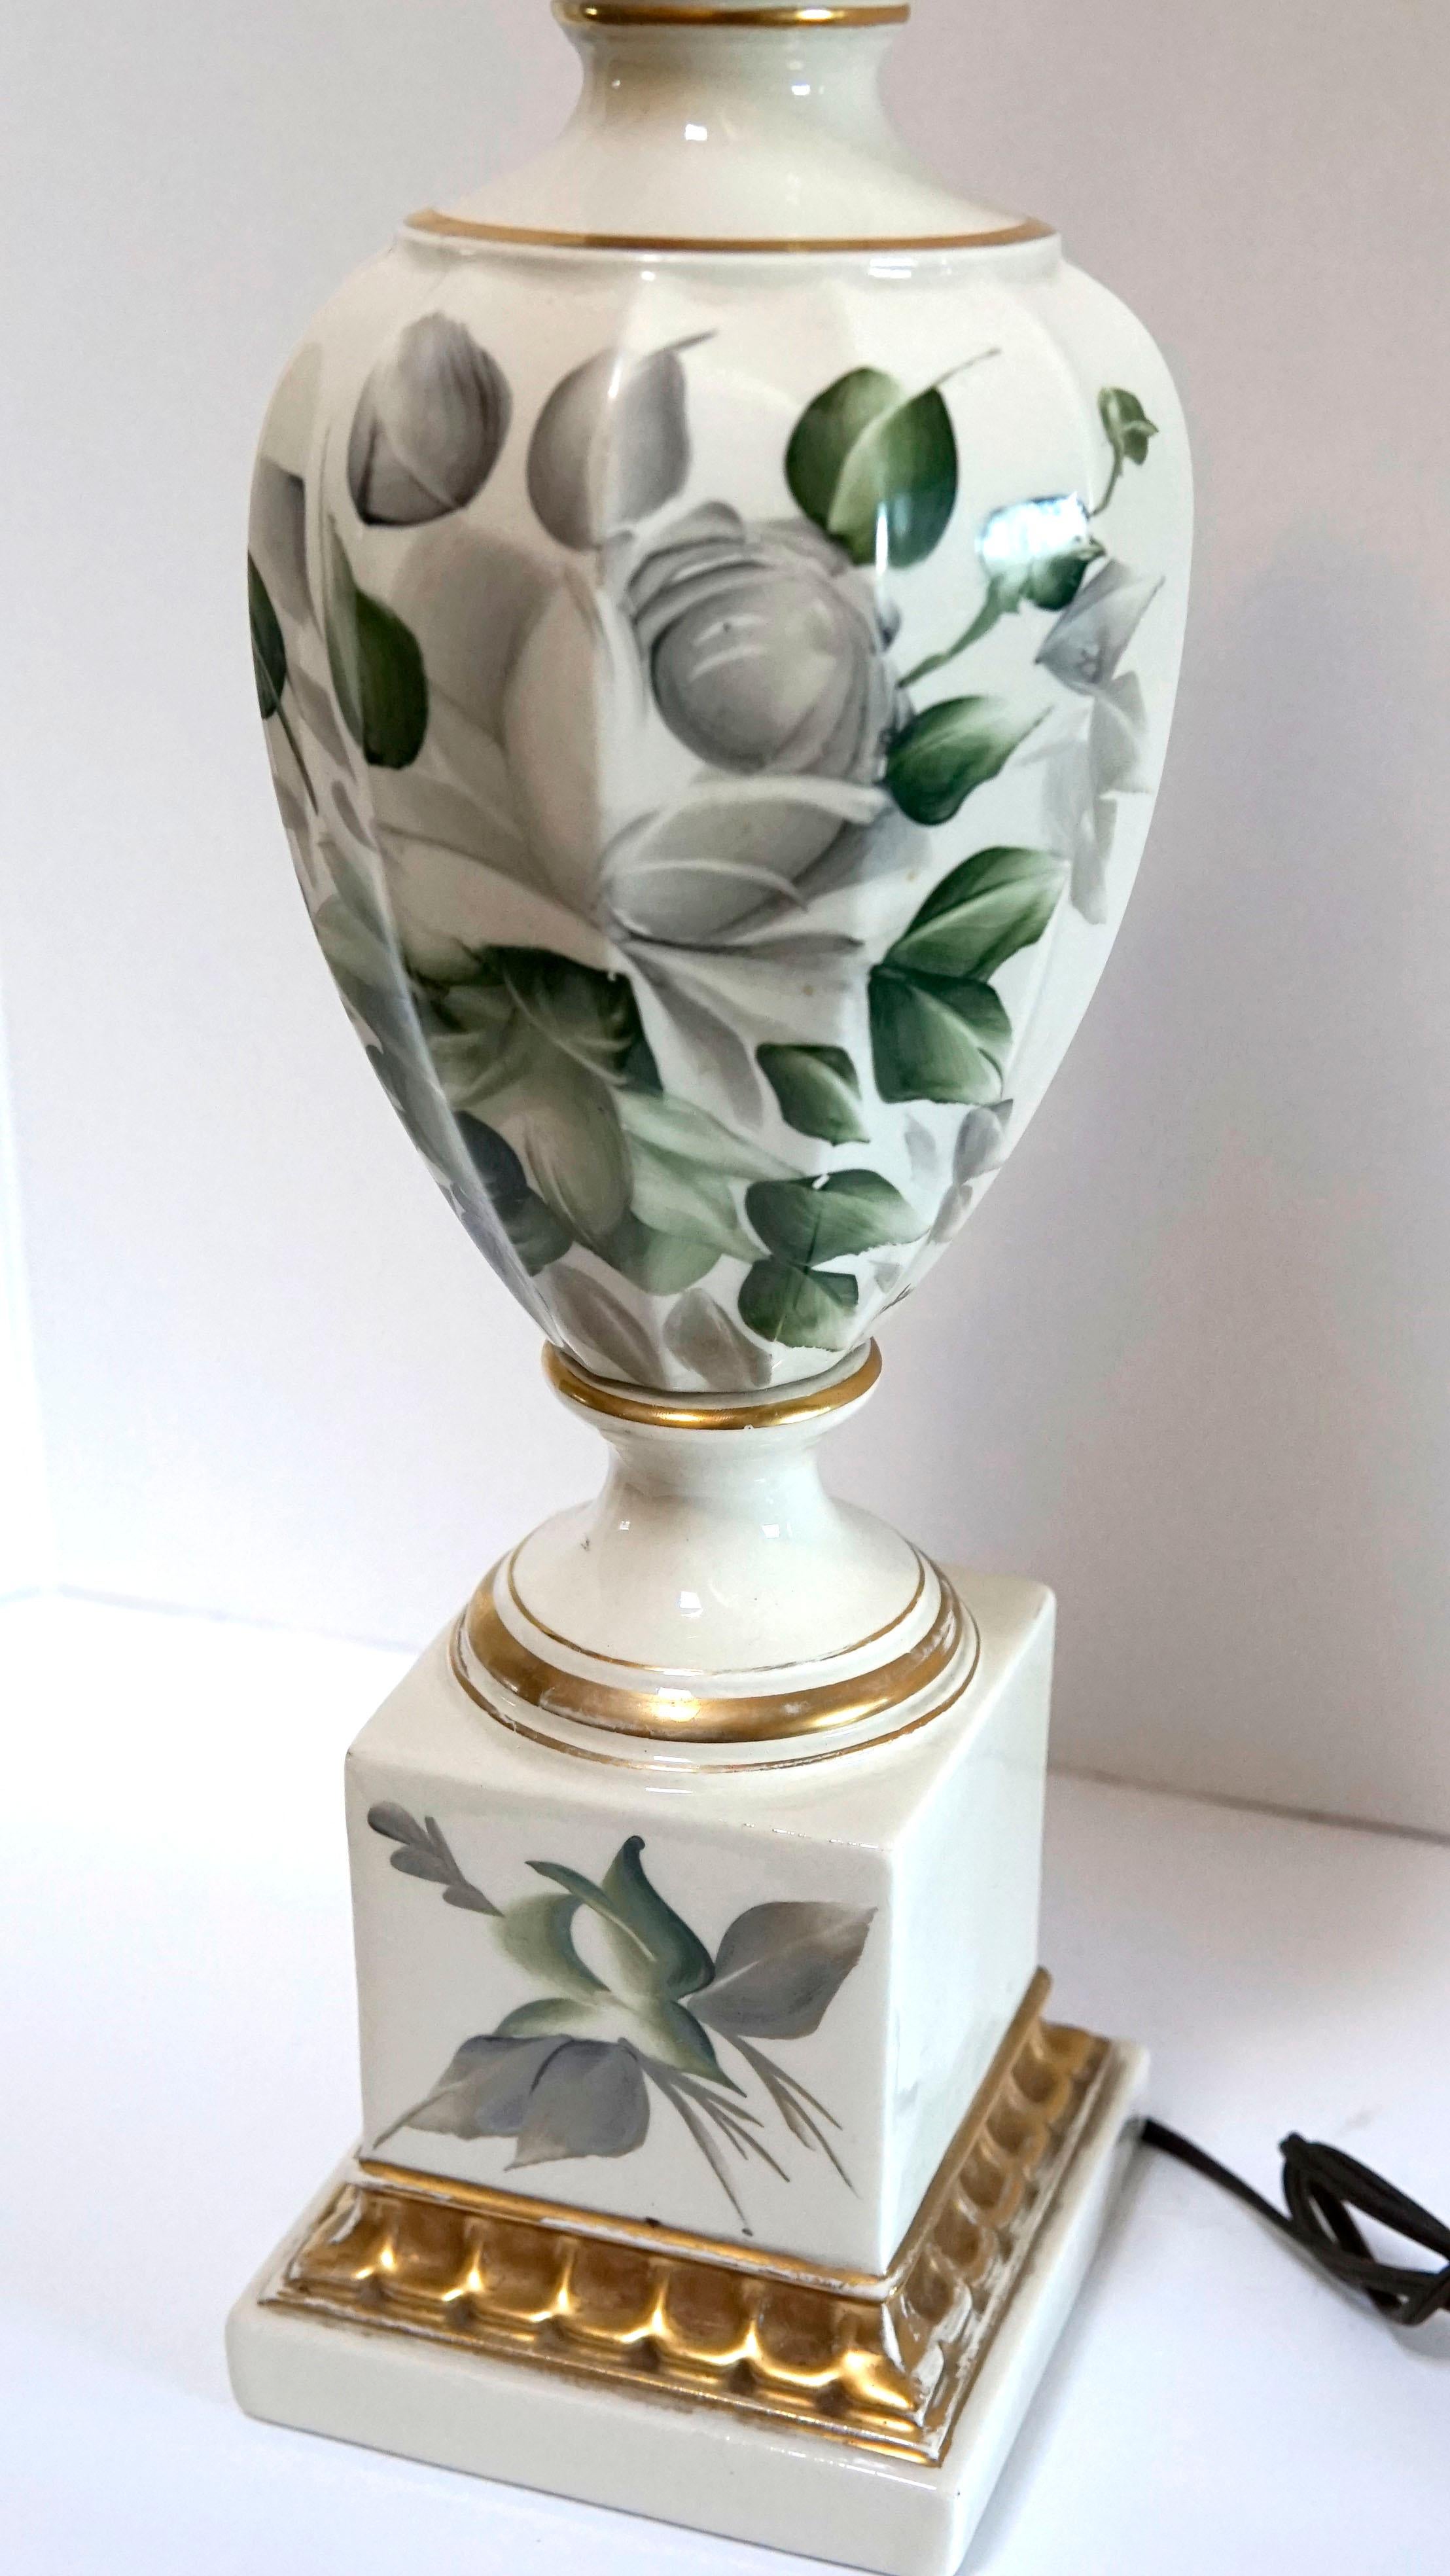 This lamp is so special, so elegant and hard to find. The palette is attractive in ivory with leaves in various shades of green and gray that appear to be falling on this vintage botanical hand-painted porcelain vasiform table lamp. This is